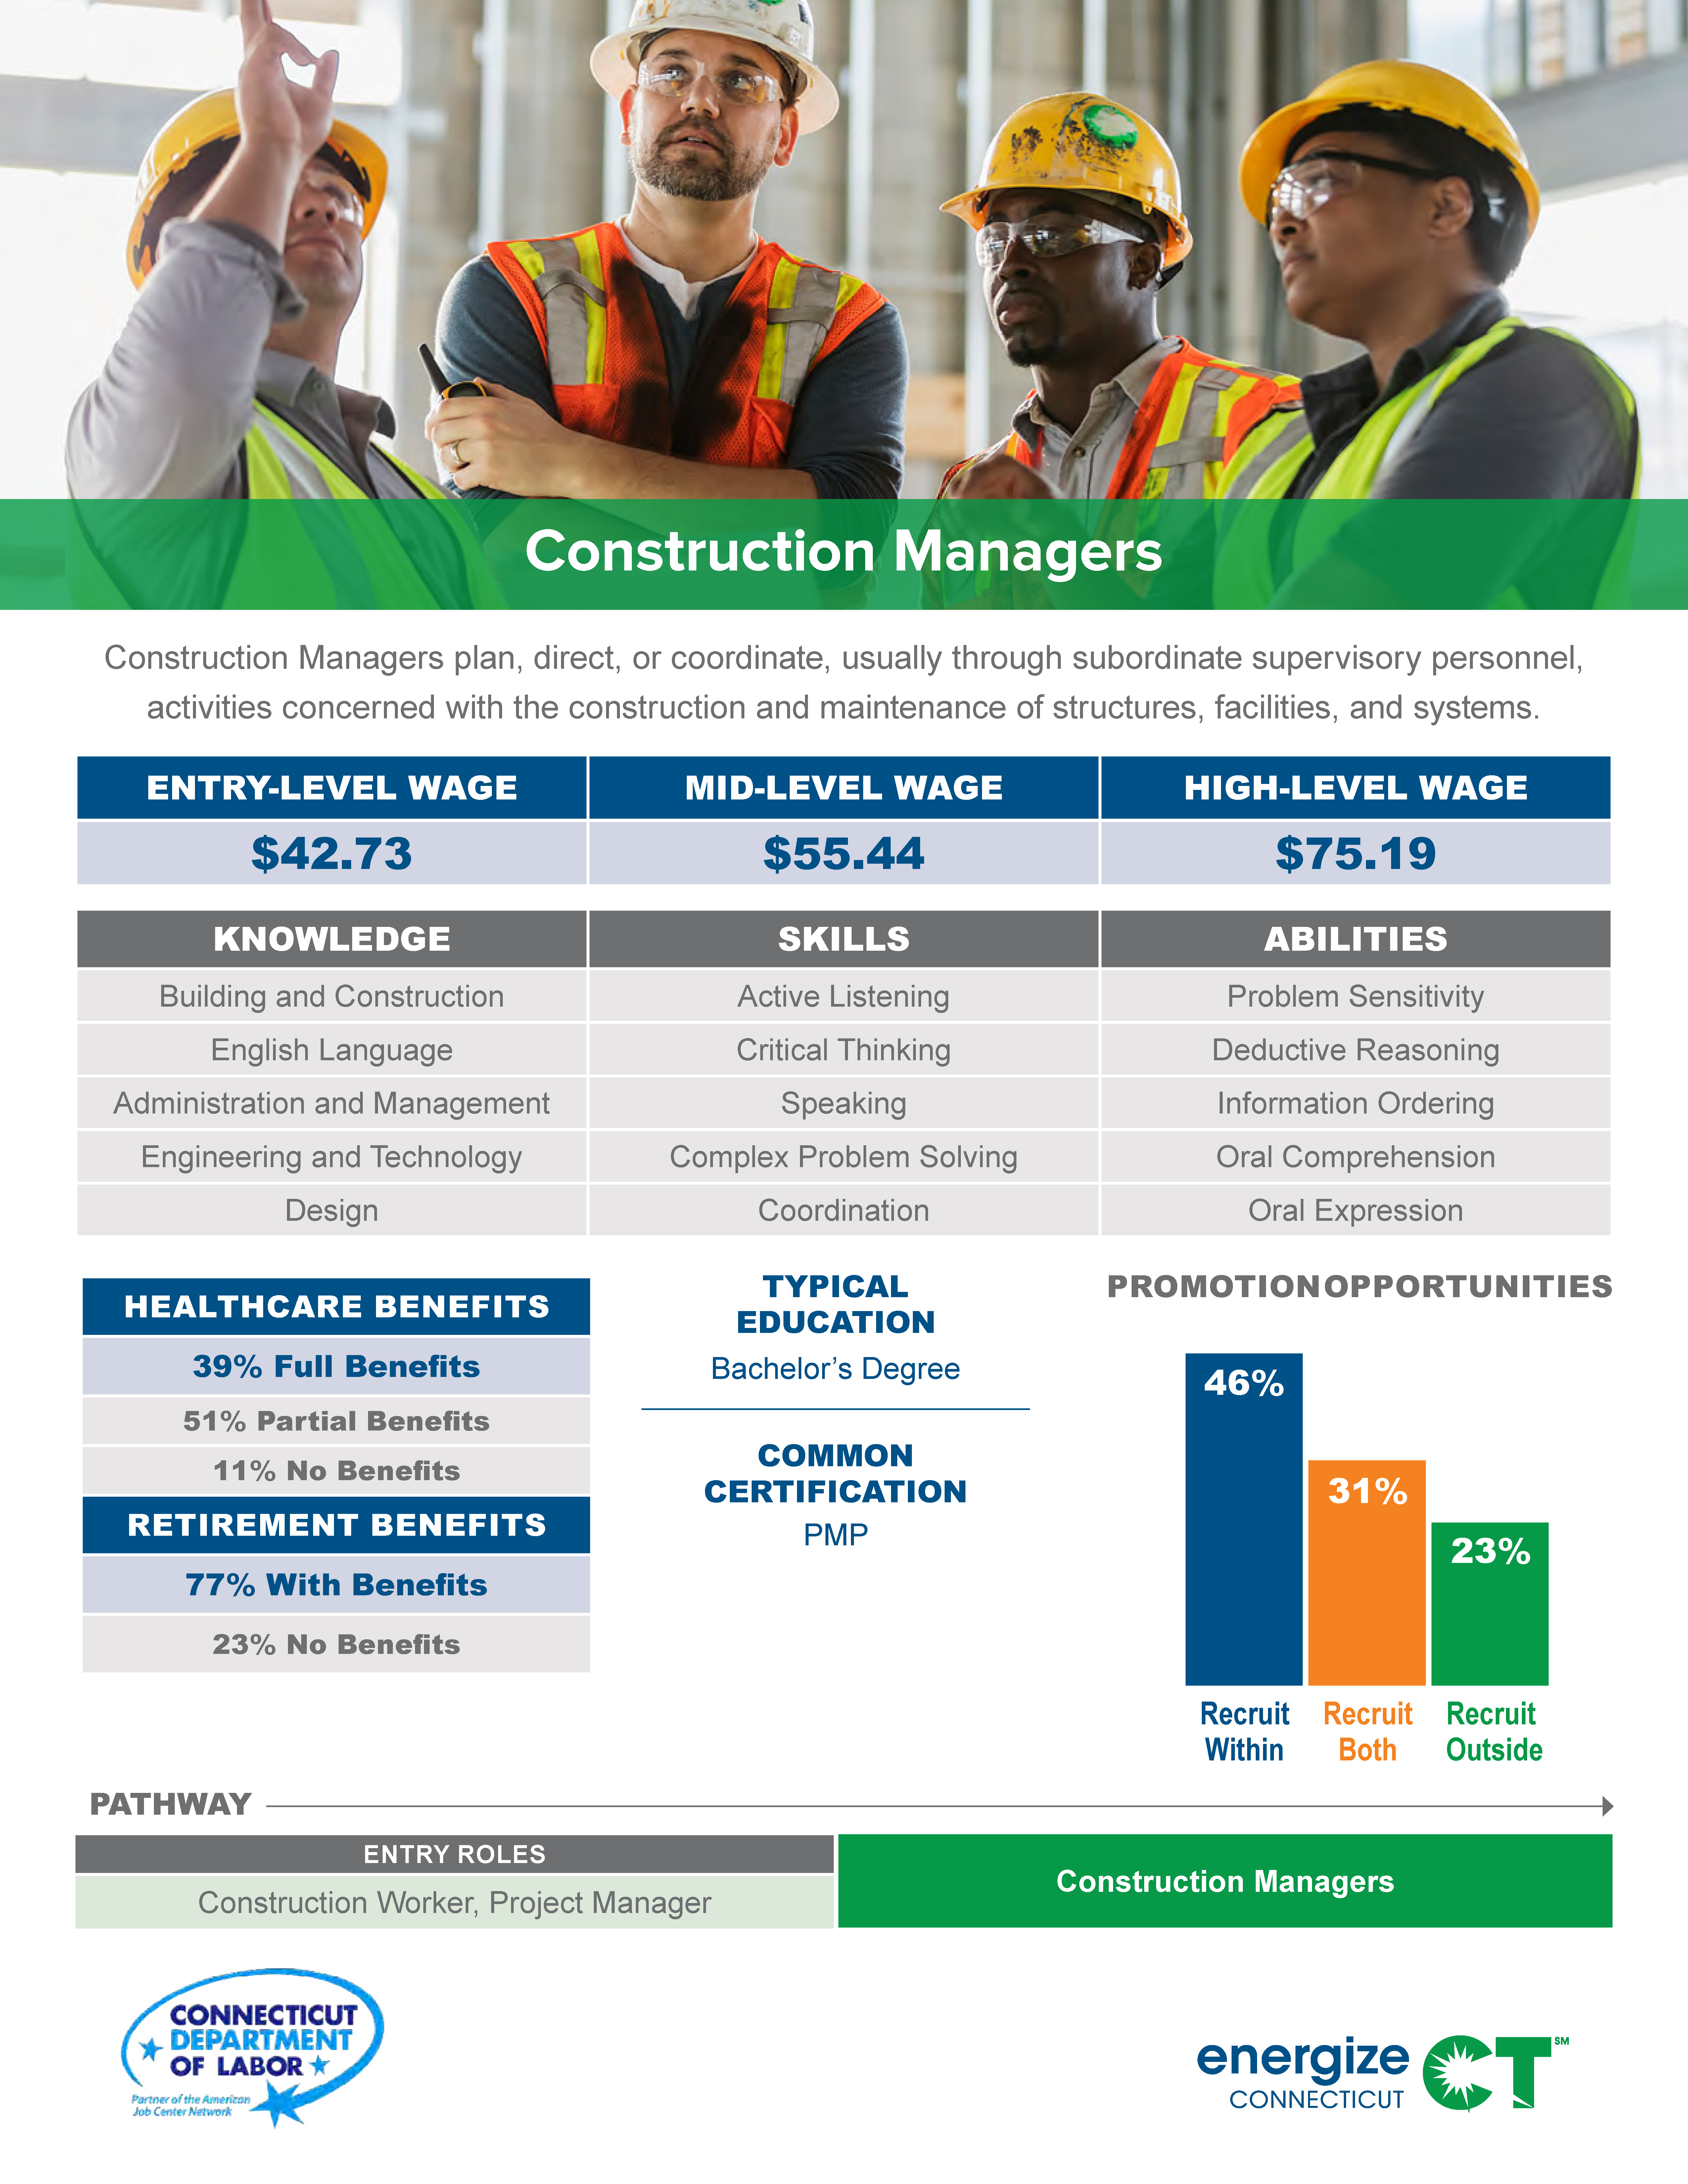 Construction Managers